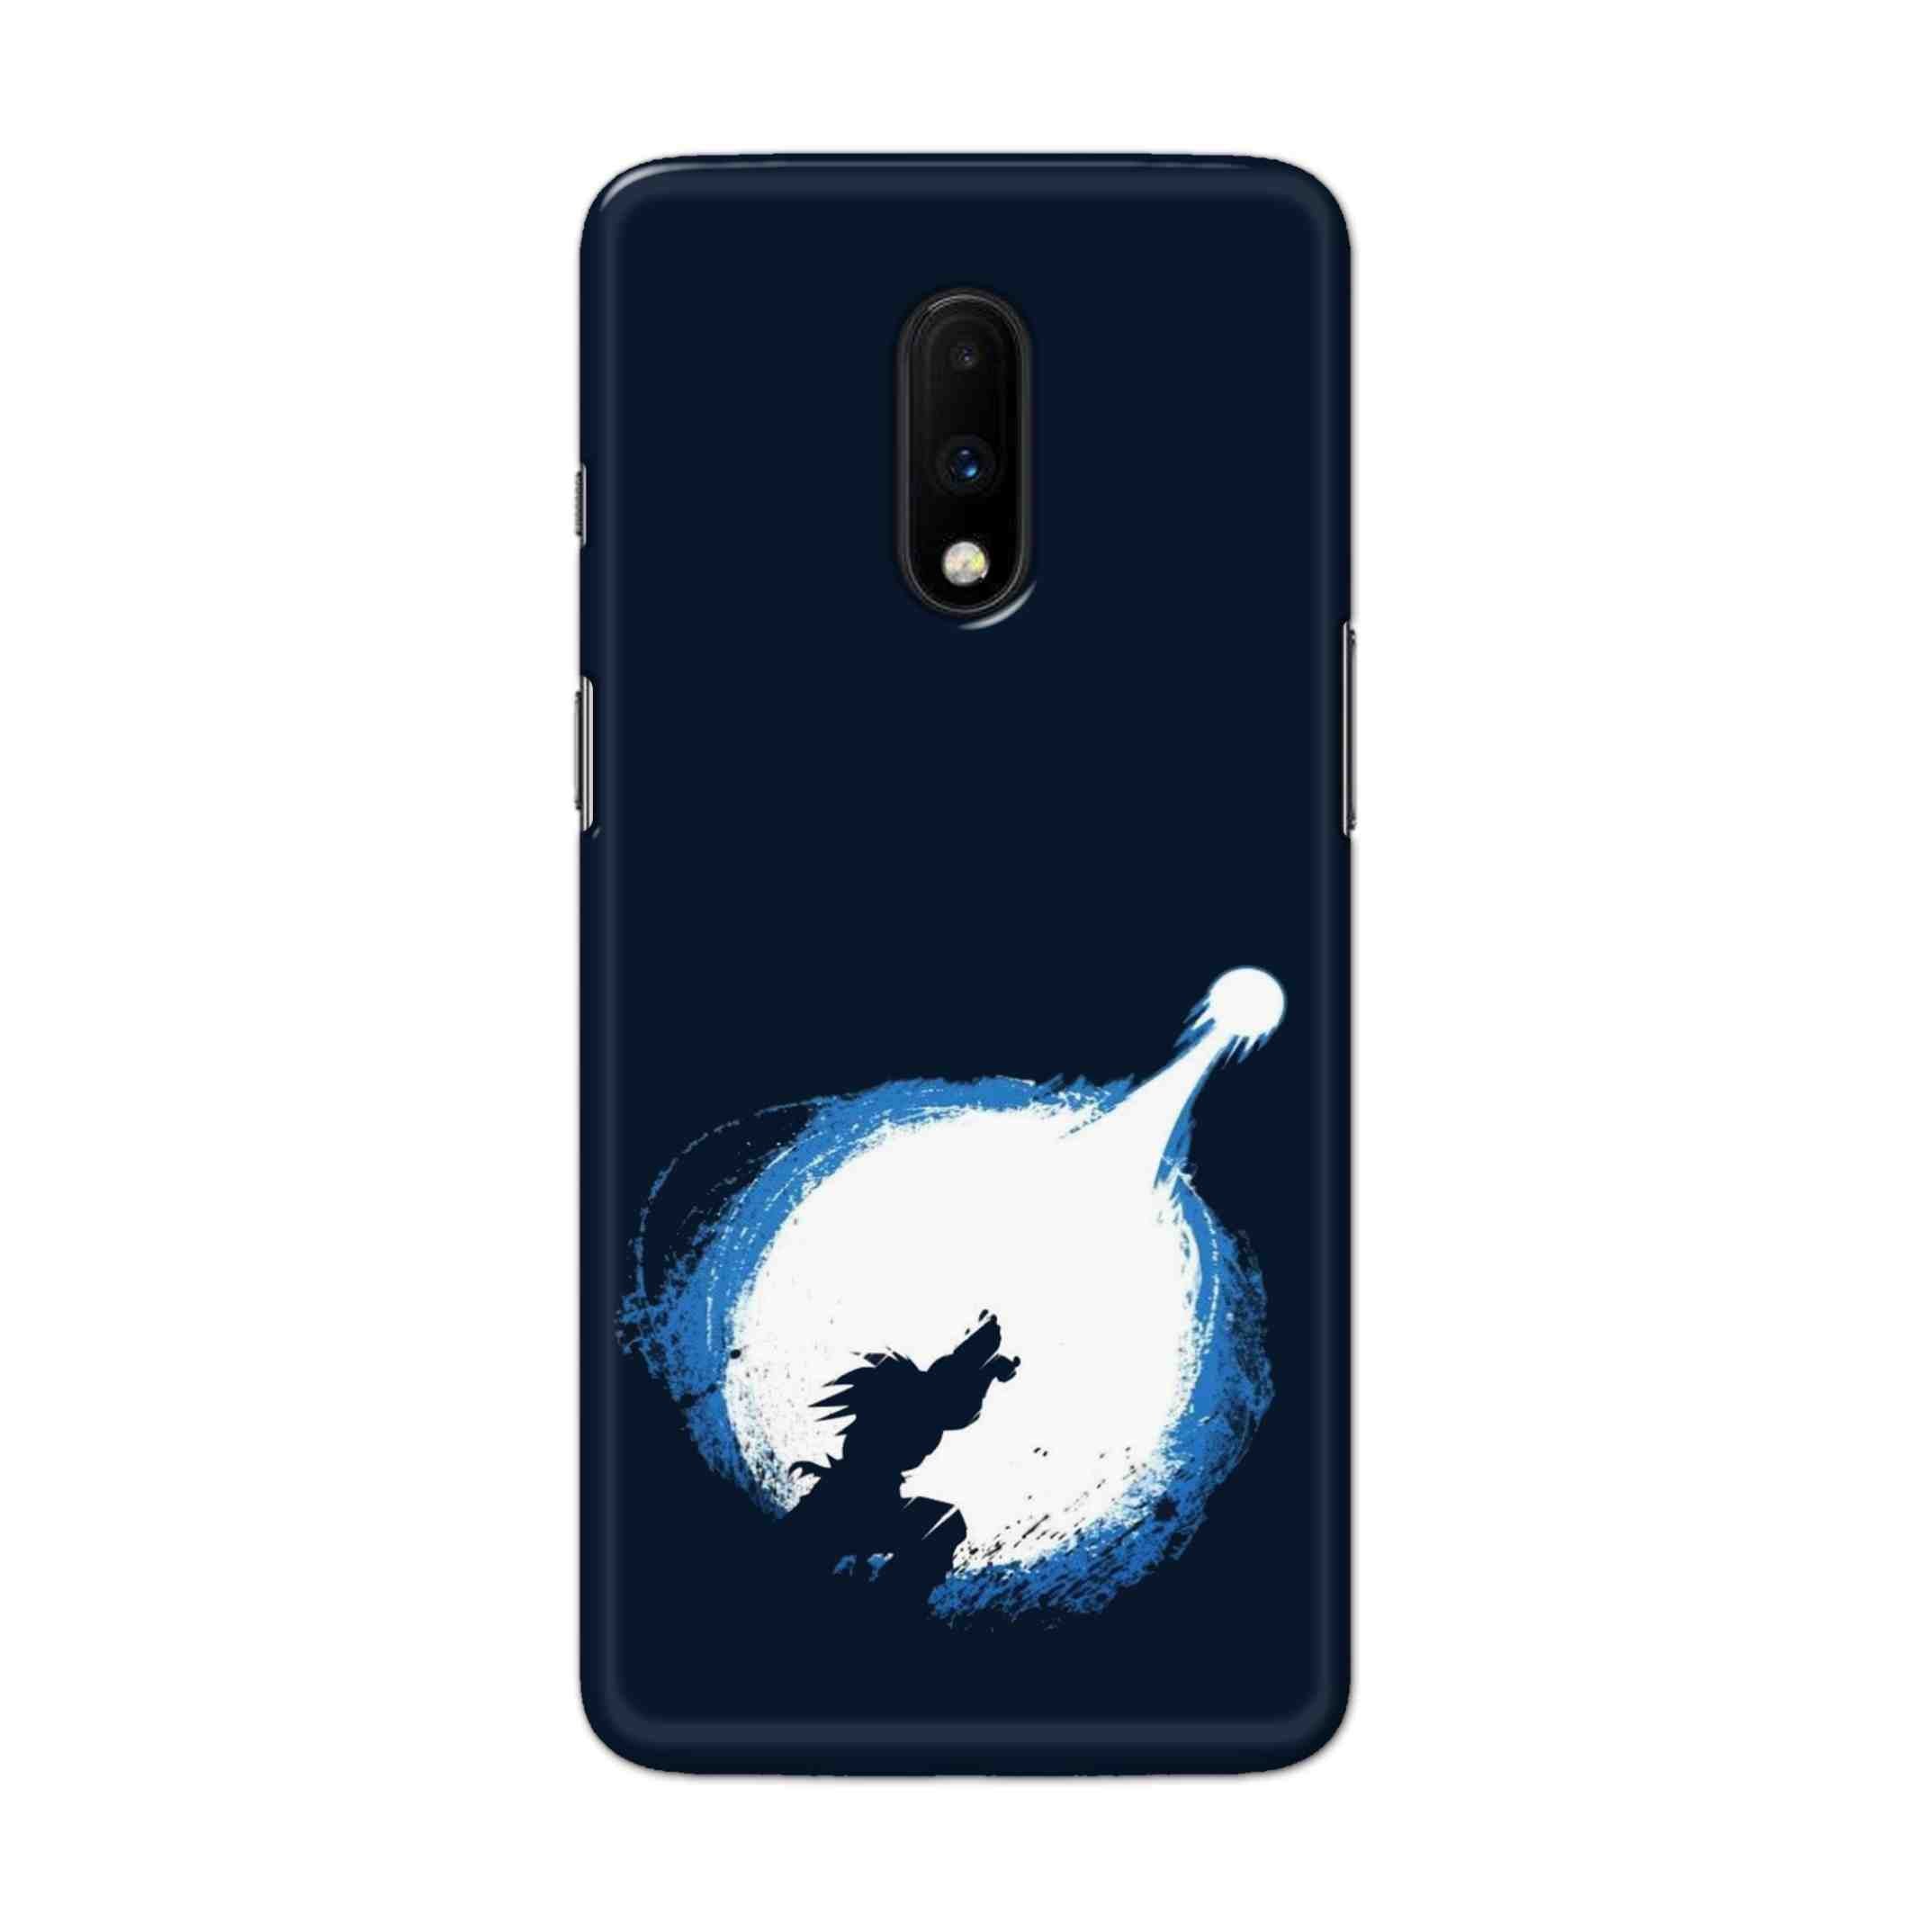 Buy Goku Power Hard Back Mobile Phone Case Cover For OnePlus 7 Online